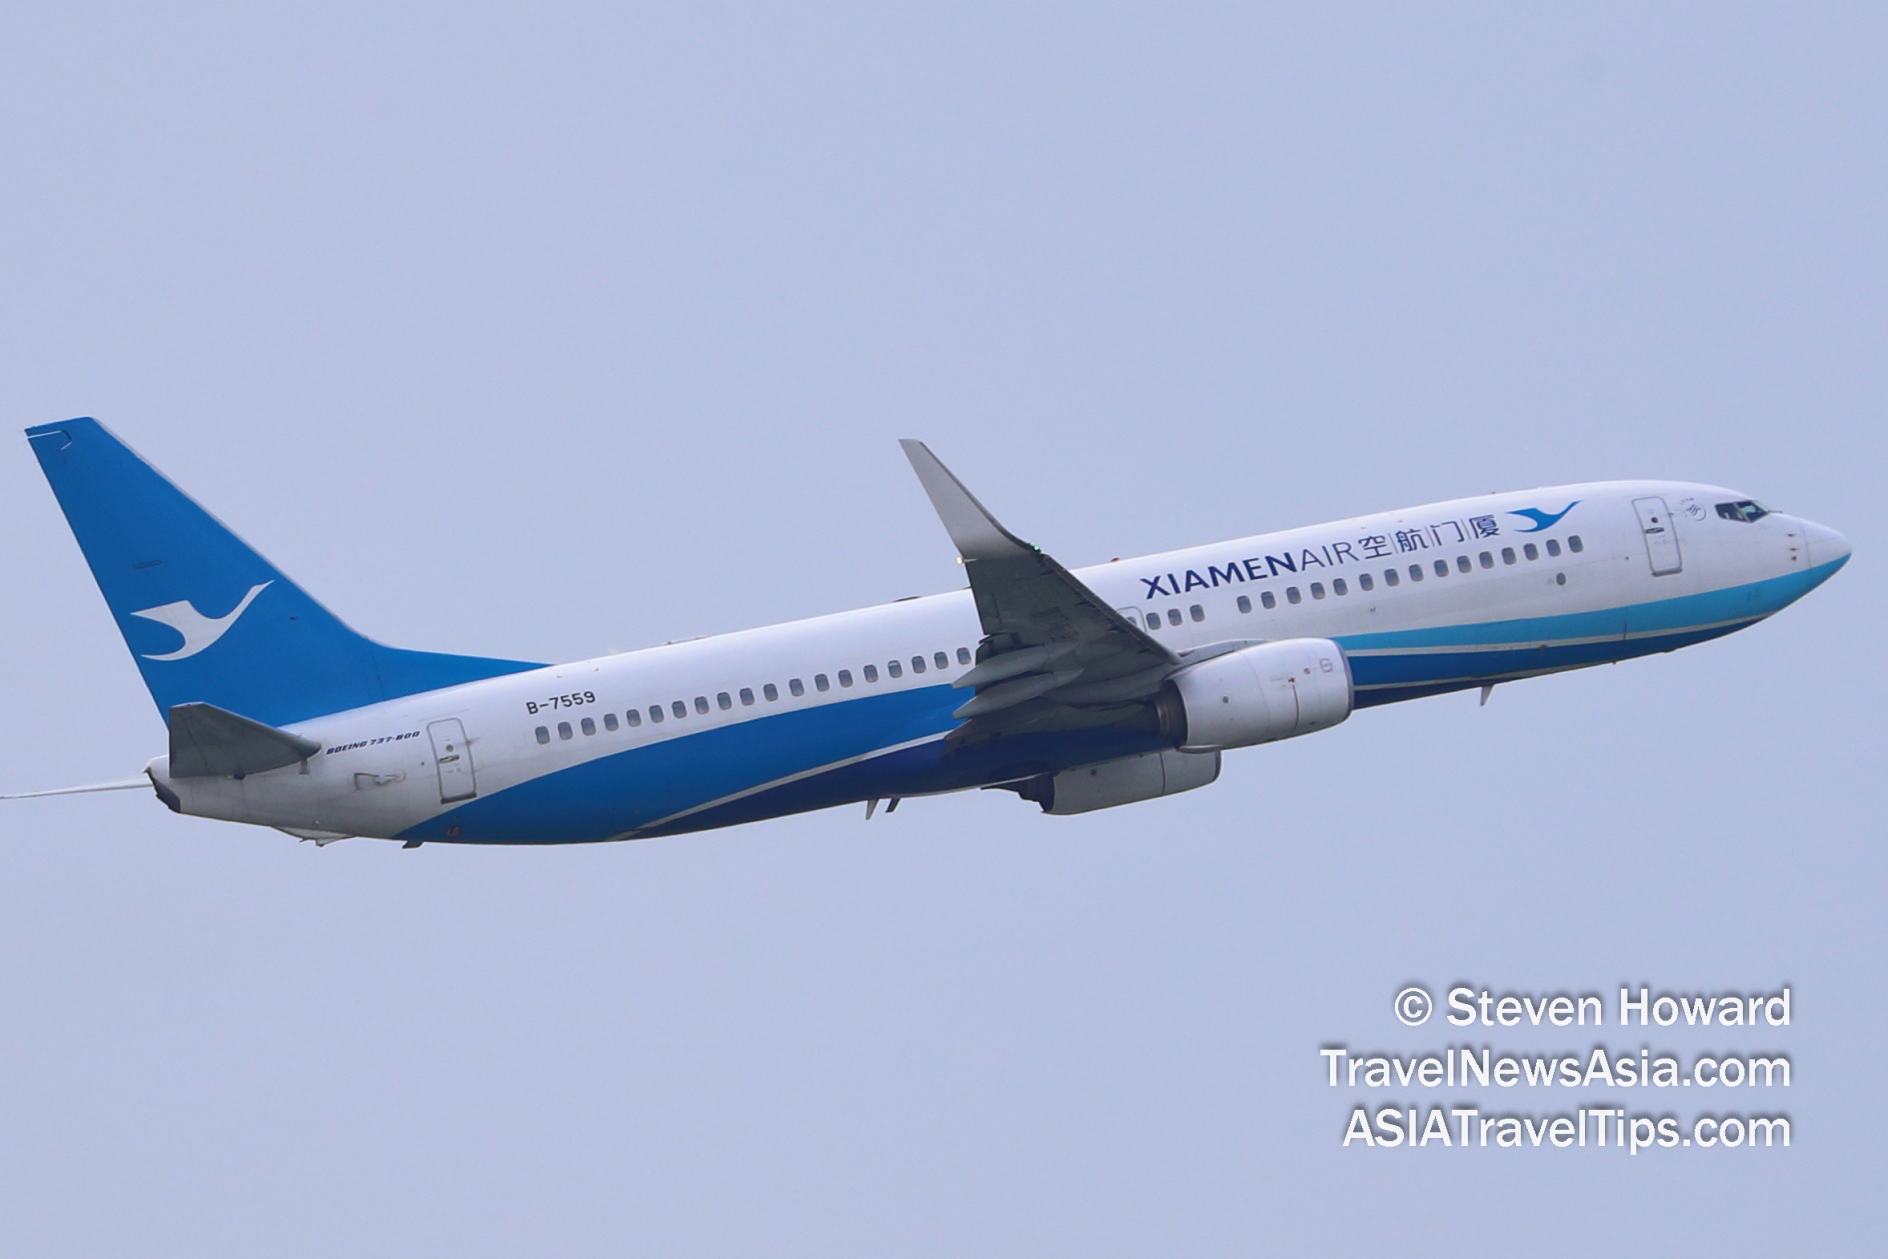 Xiamen Airlines Boeing 737 reg: B-7559. Picture by Steven Howard of TravelNewsAsia.com Click to enlarge.